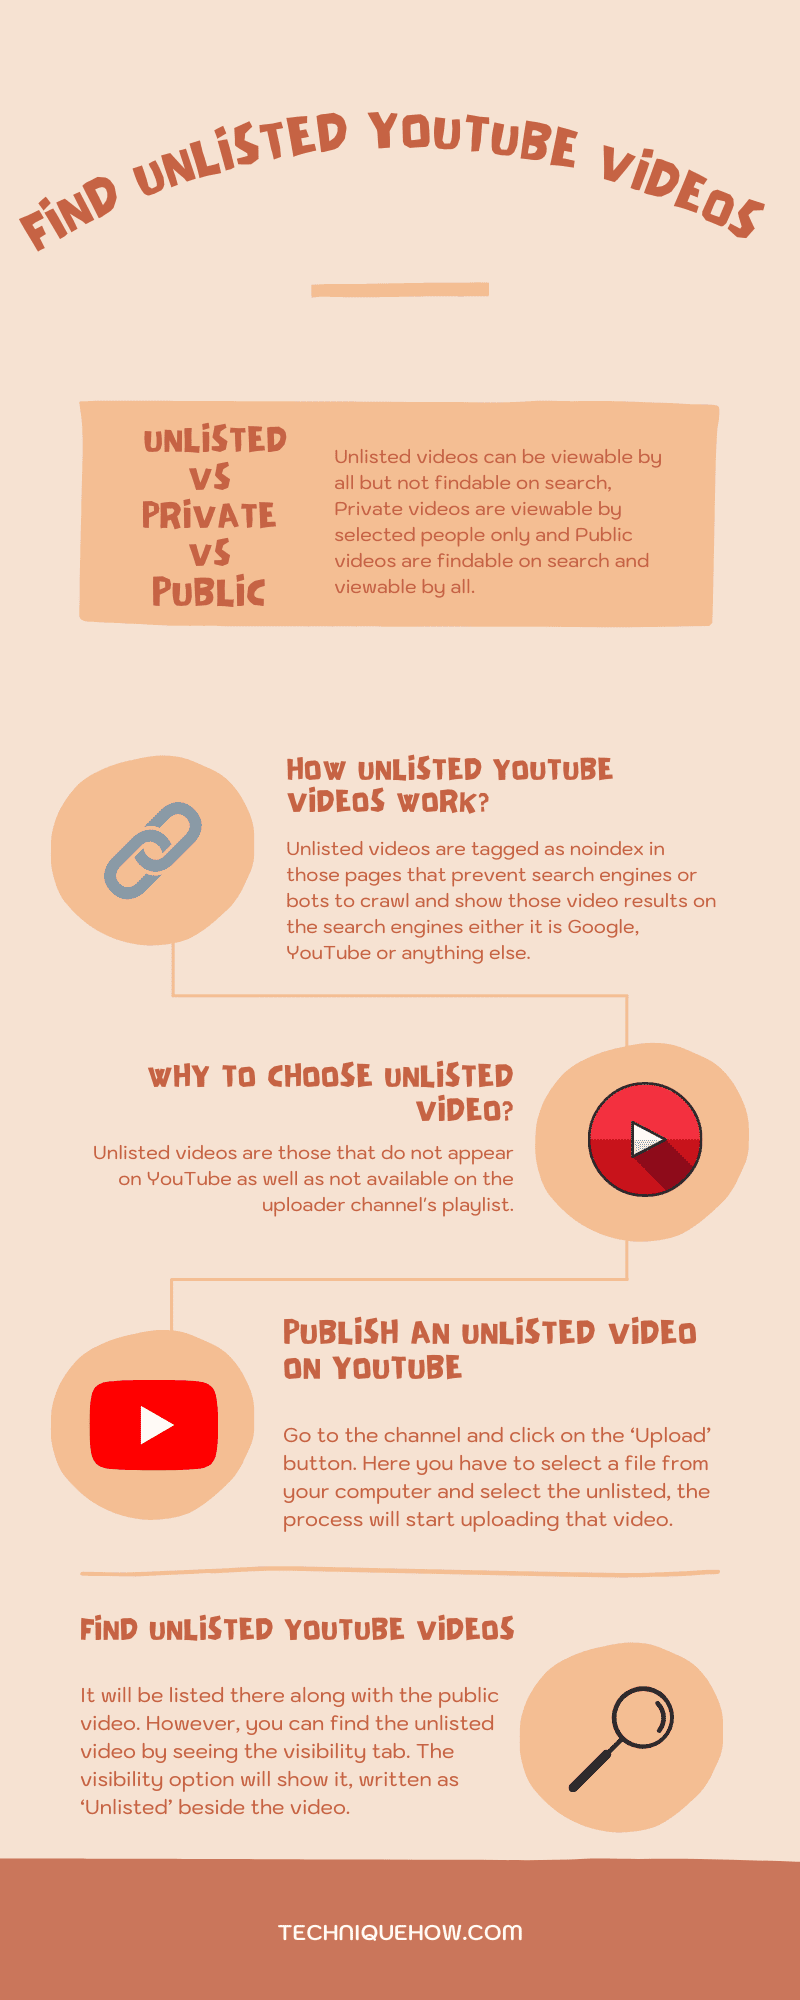 Infographic_Find Unlisted YouTube Videos.png